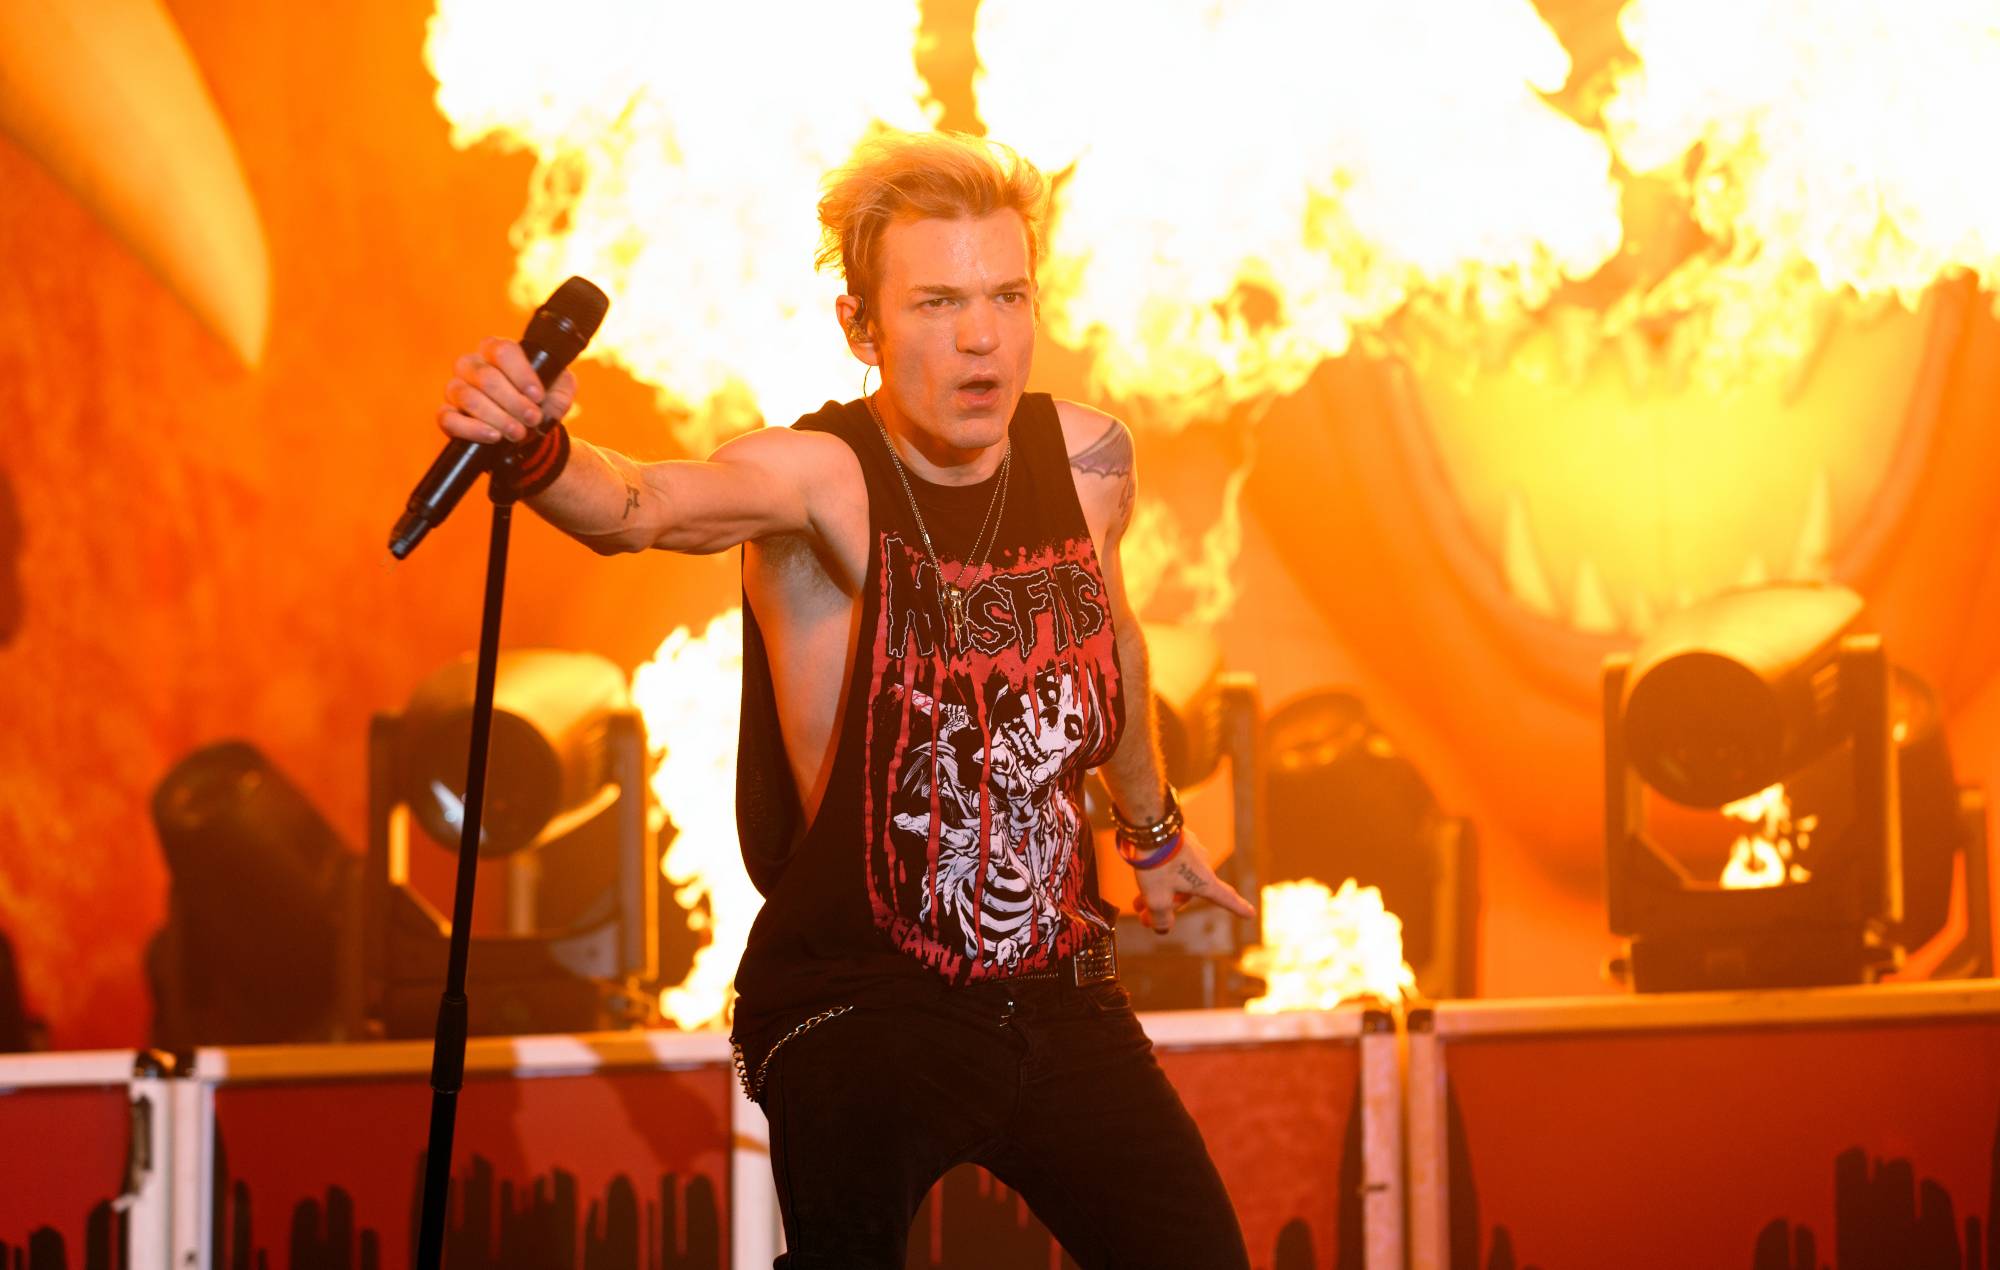 Sum 41’s Deryck Whibley opens up about “scary” hospitalisation following pneumonia